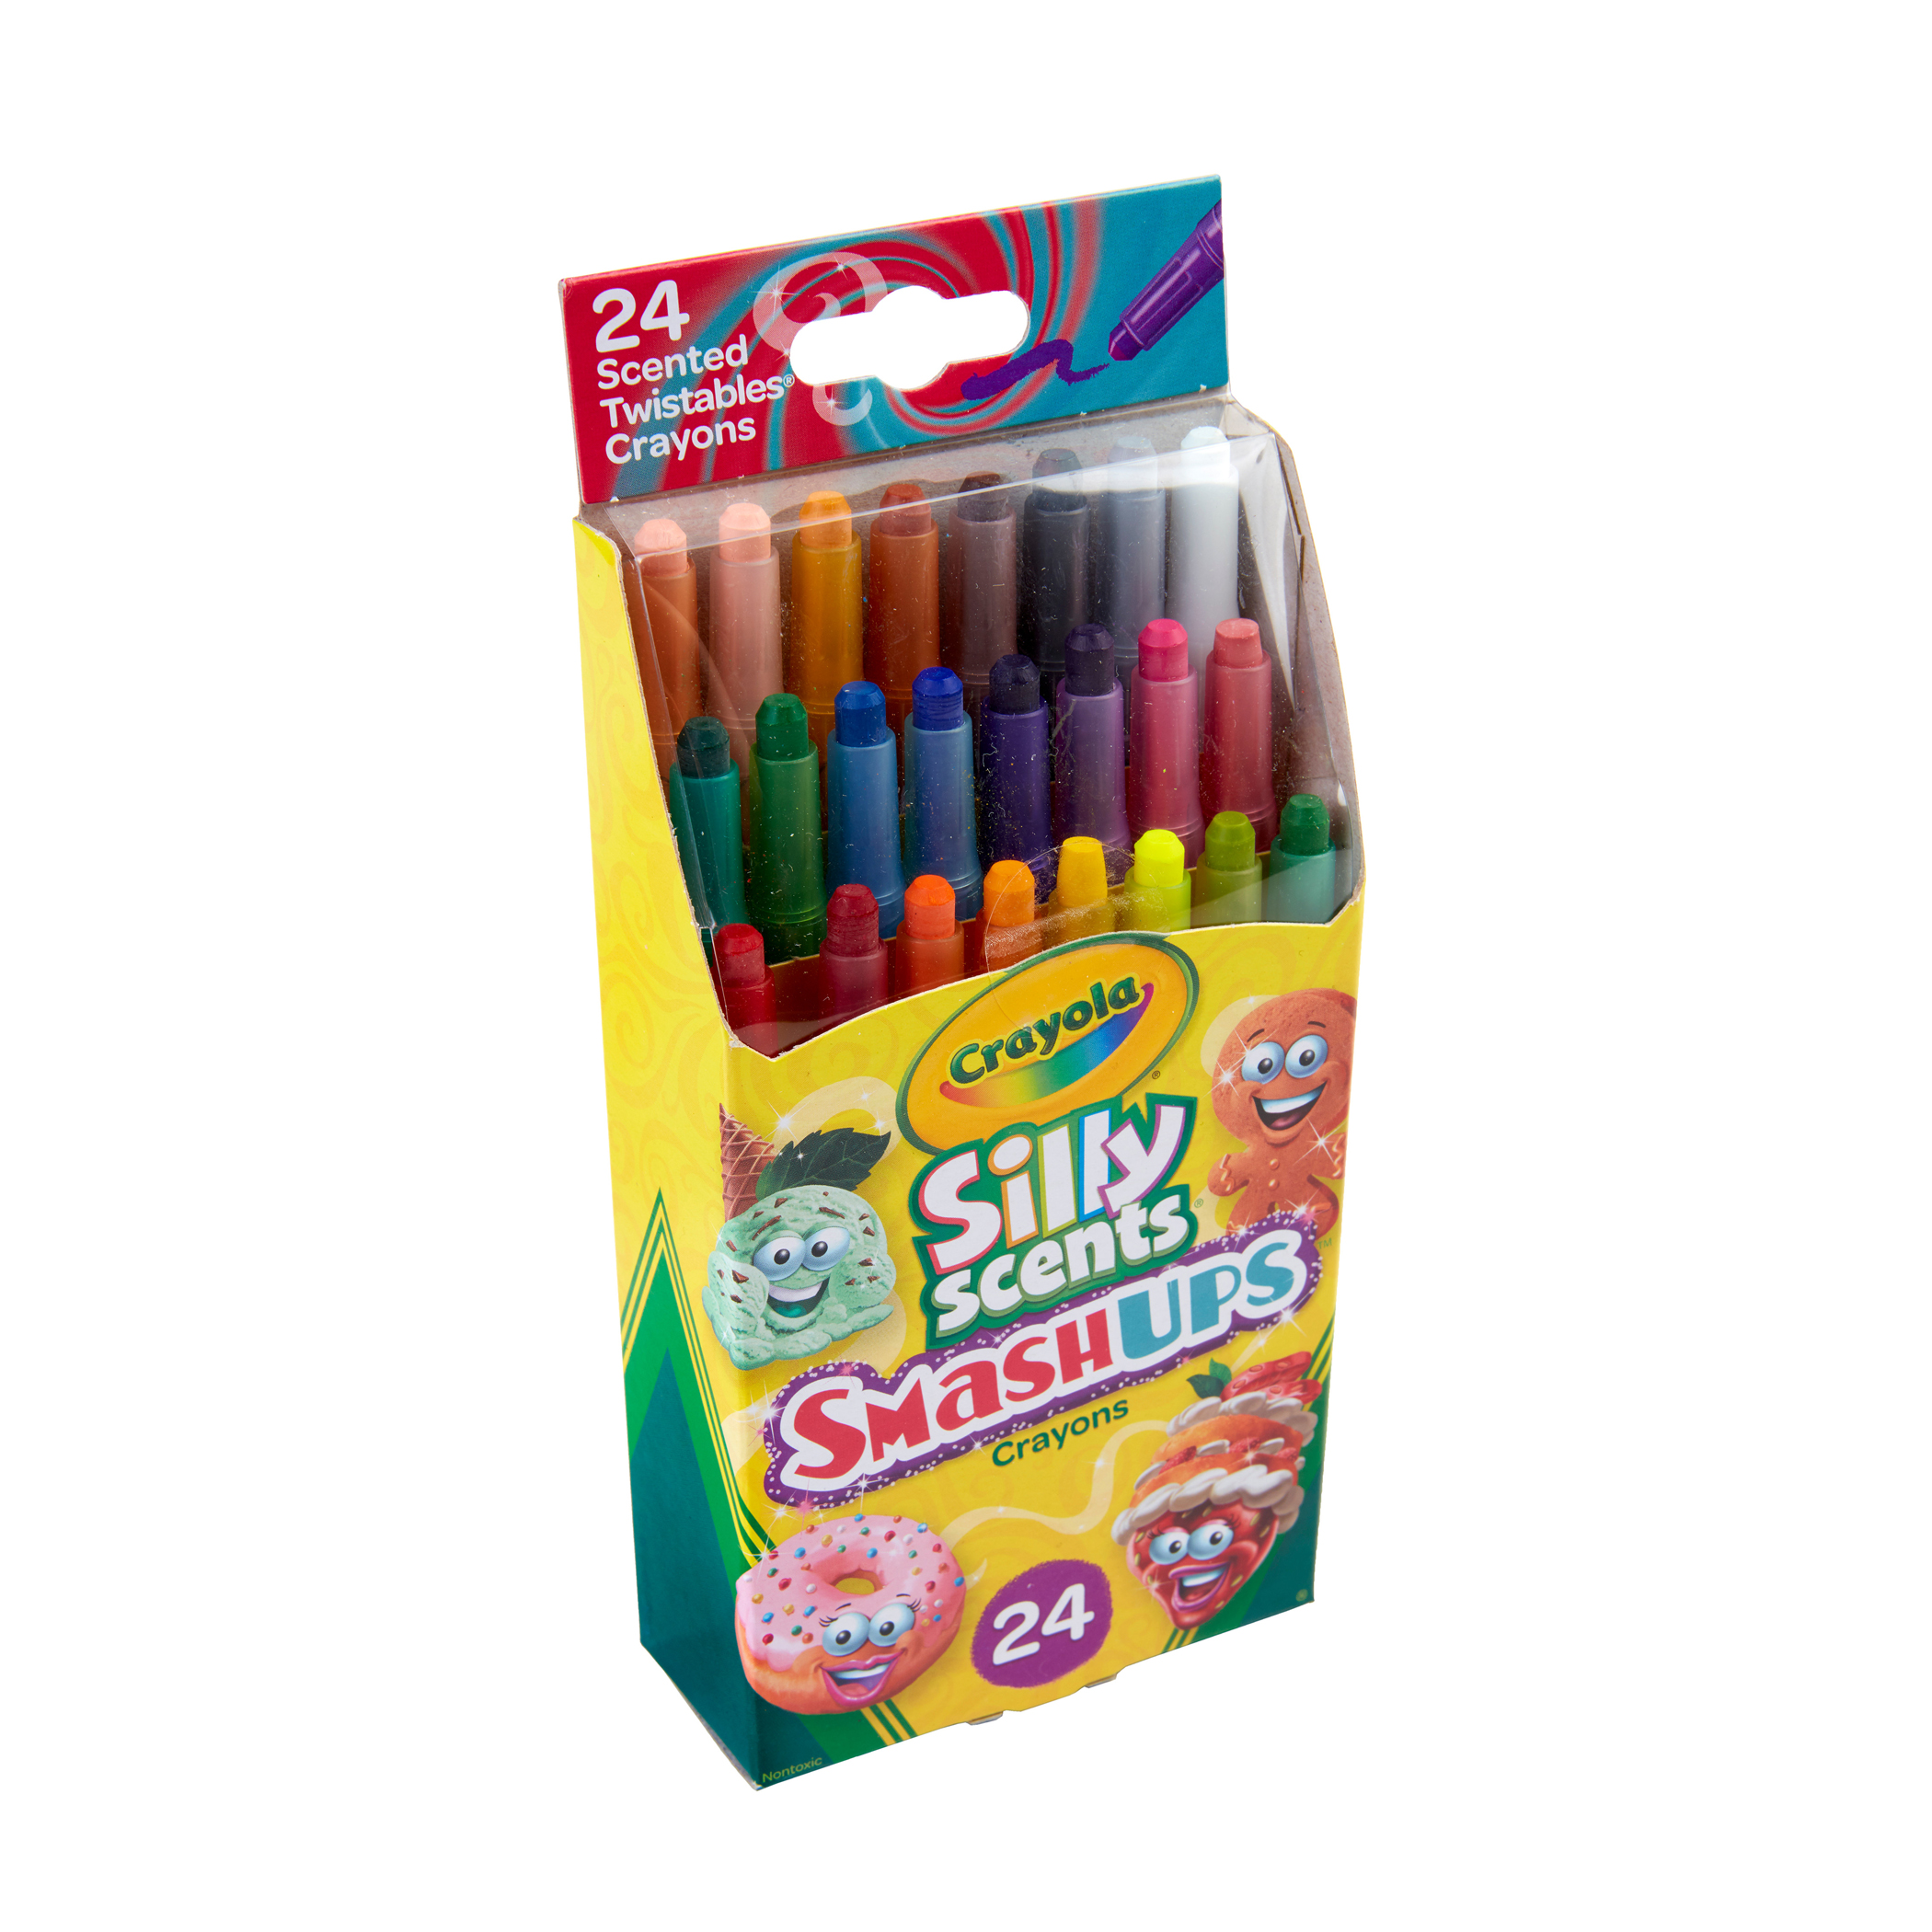 The Teachers' Lounge®  Silly Scents™ Smash Ups Mini Twistables Scented  Crayons, 24 Per Pack, 4 Packs